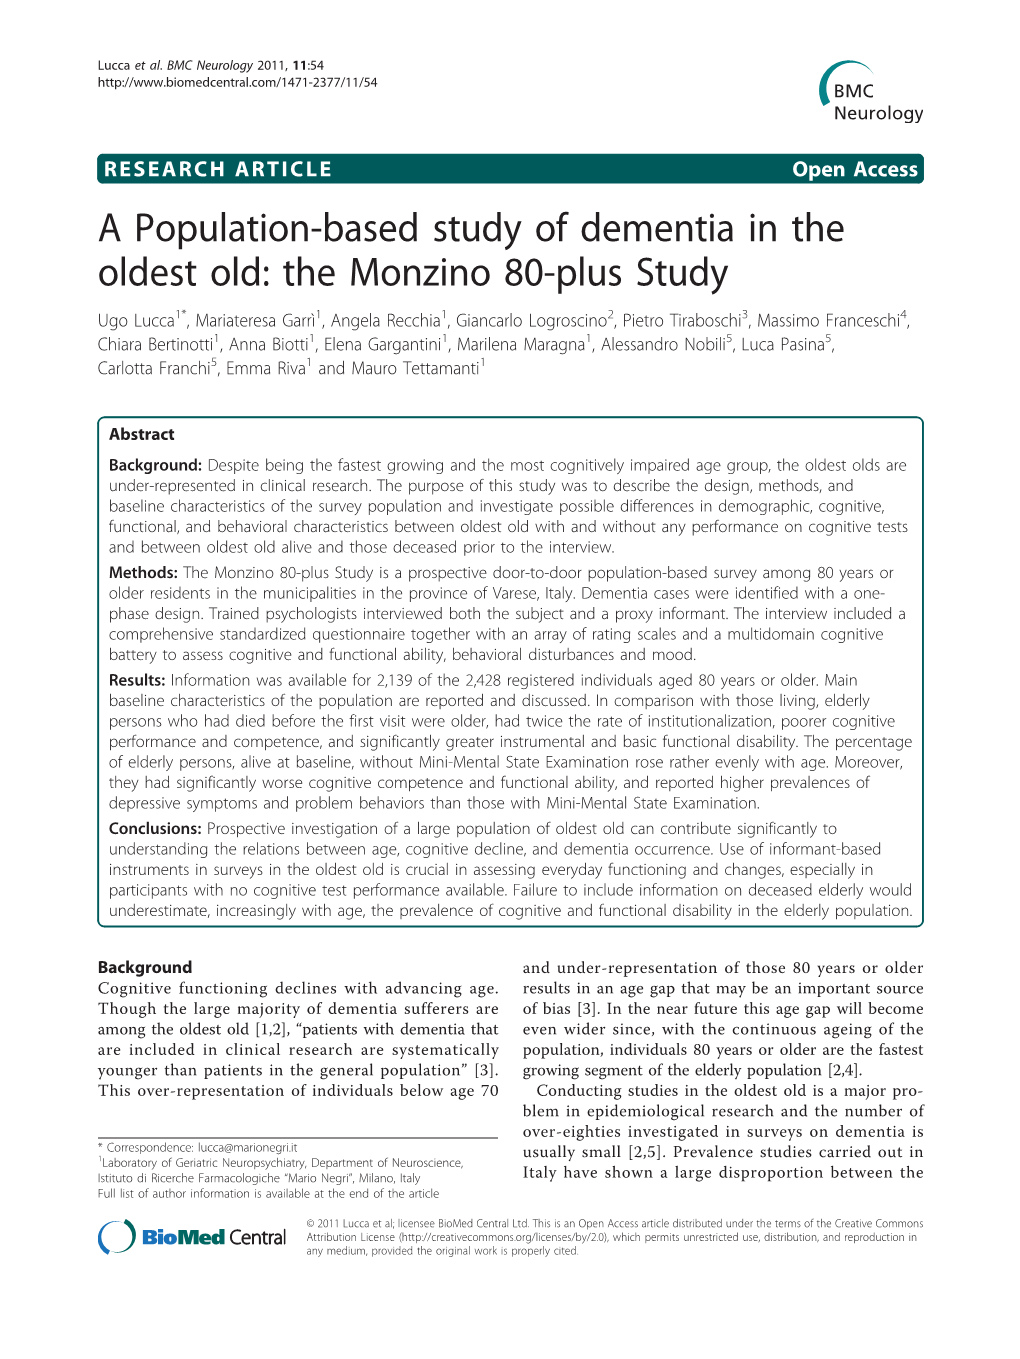 A Population-Based Study of Dementia in the Oldest Old: the Monzino 80